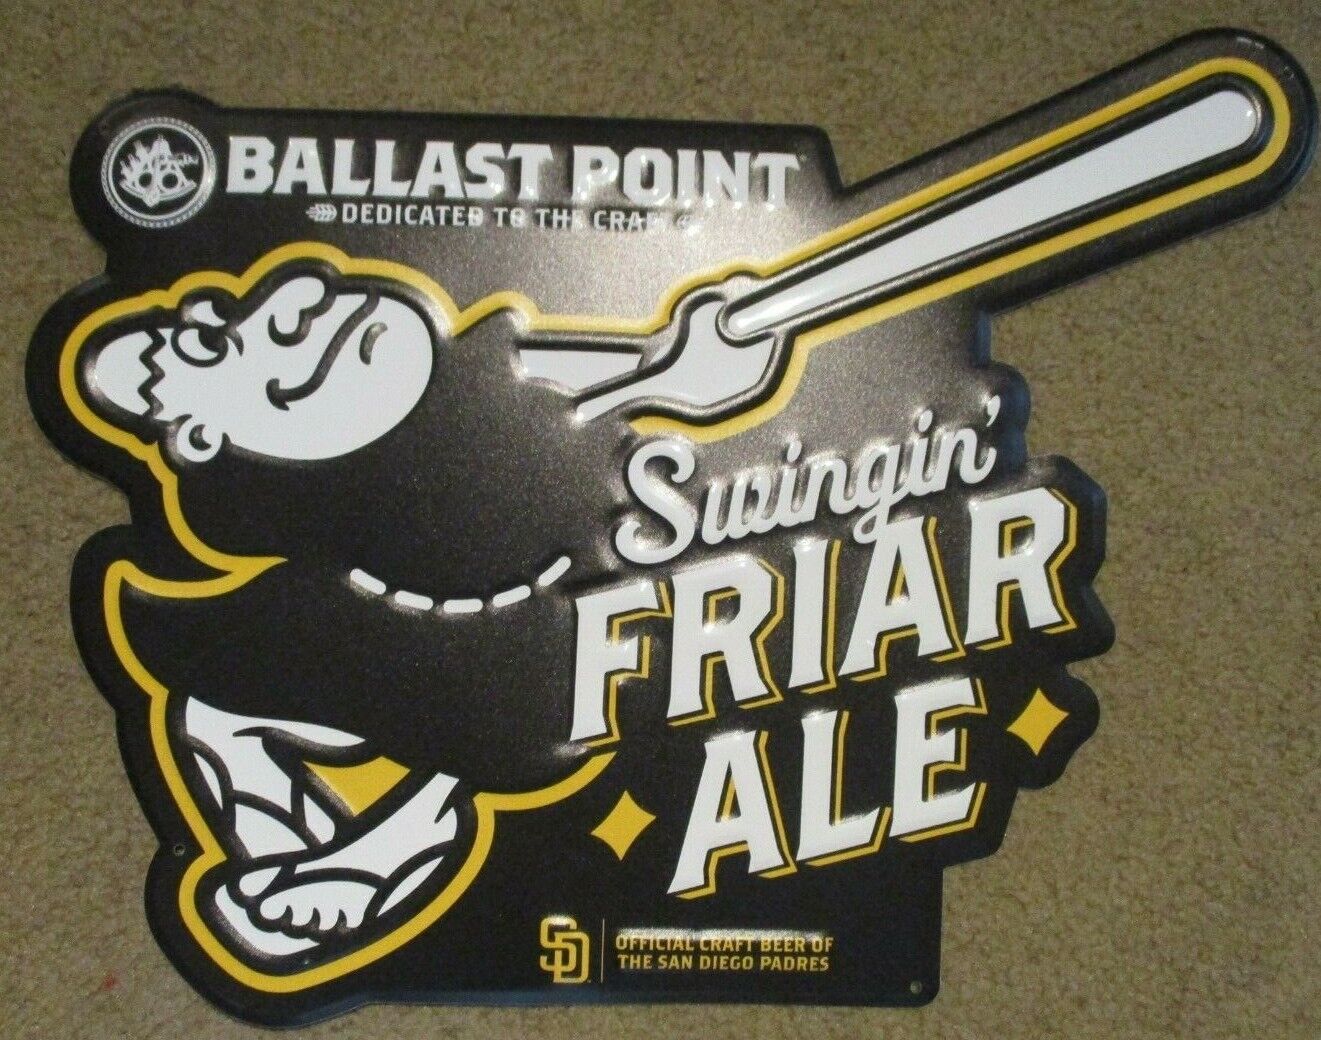 BALLAST POINT Swingin Friar Padres METAL TACKER SIGN craft beer brewery brewing